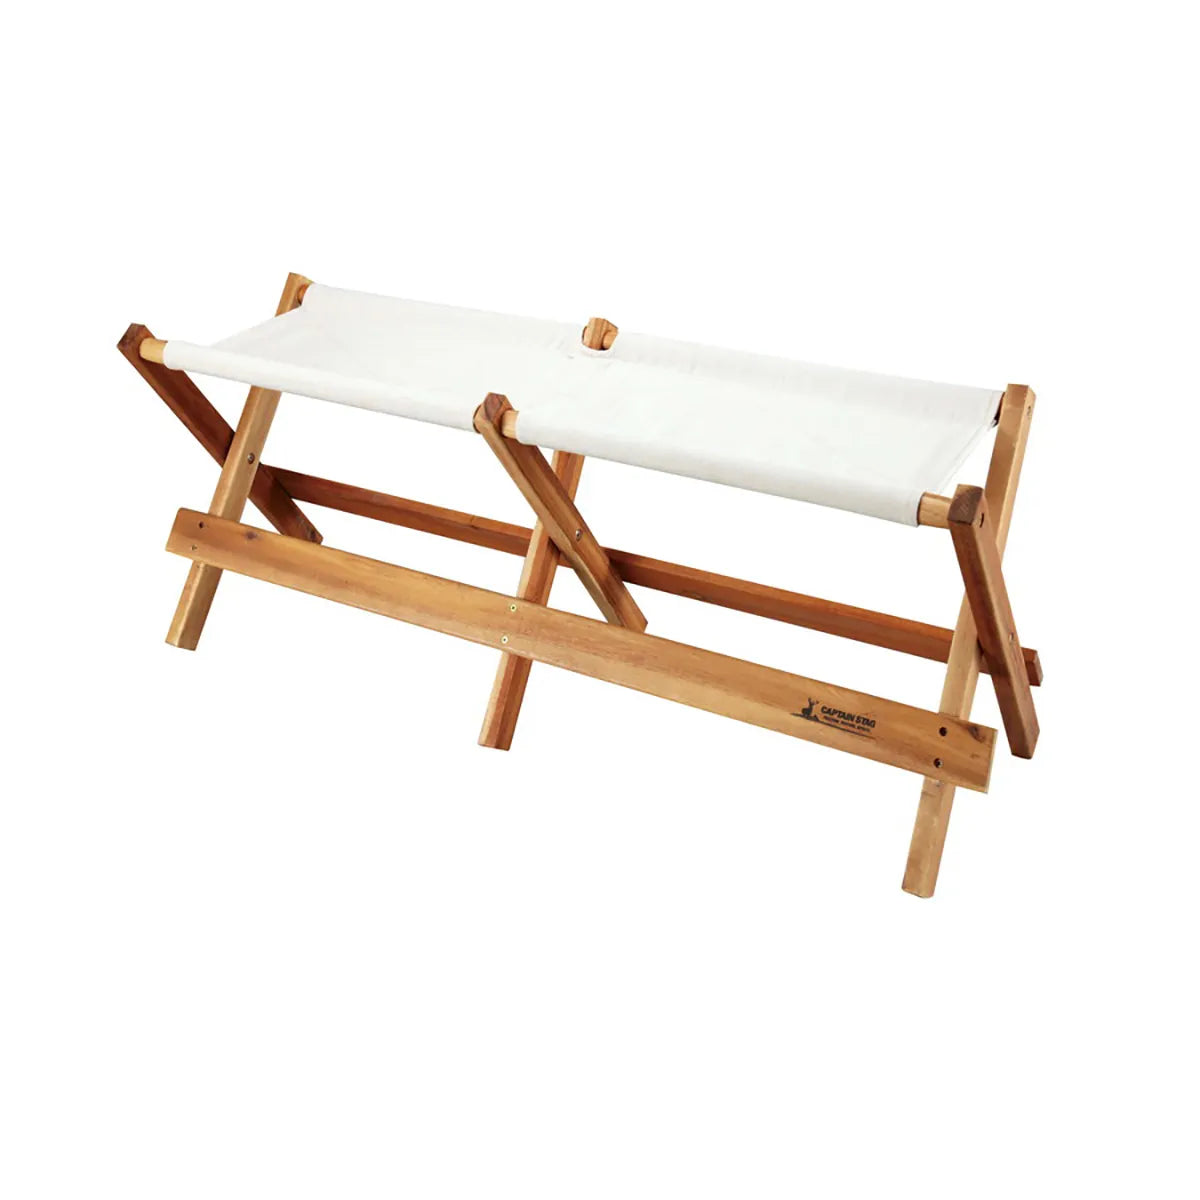 captain-stag-wooden-bench-經典長凳-up-1031的第1張產品相片